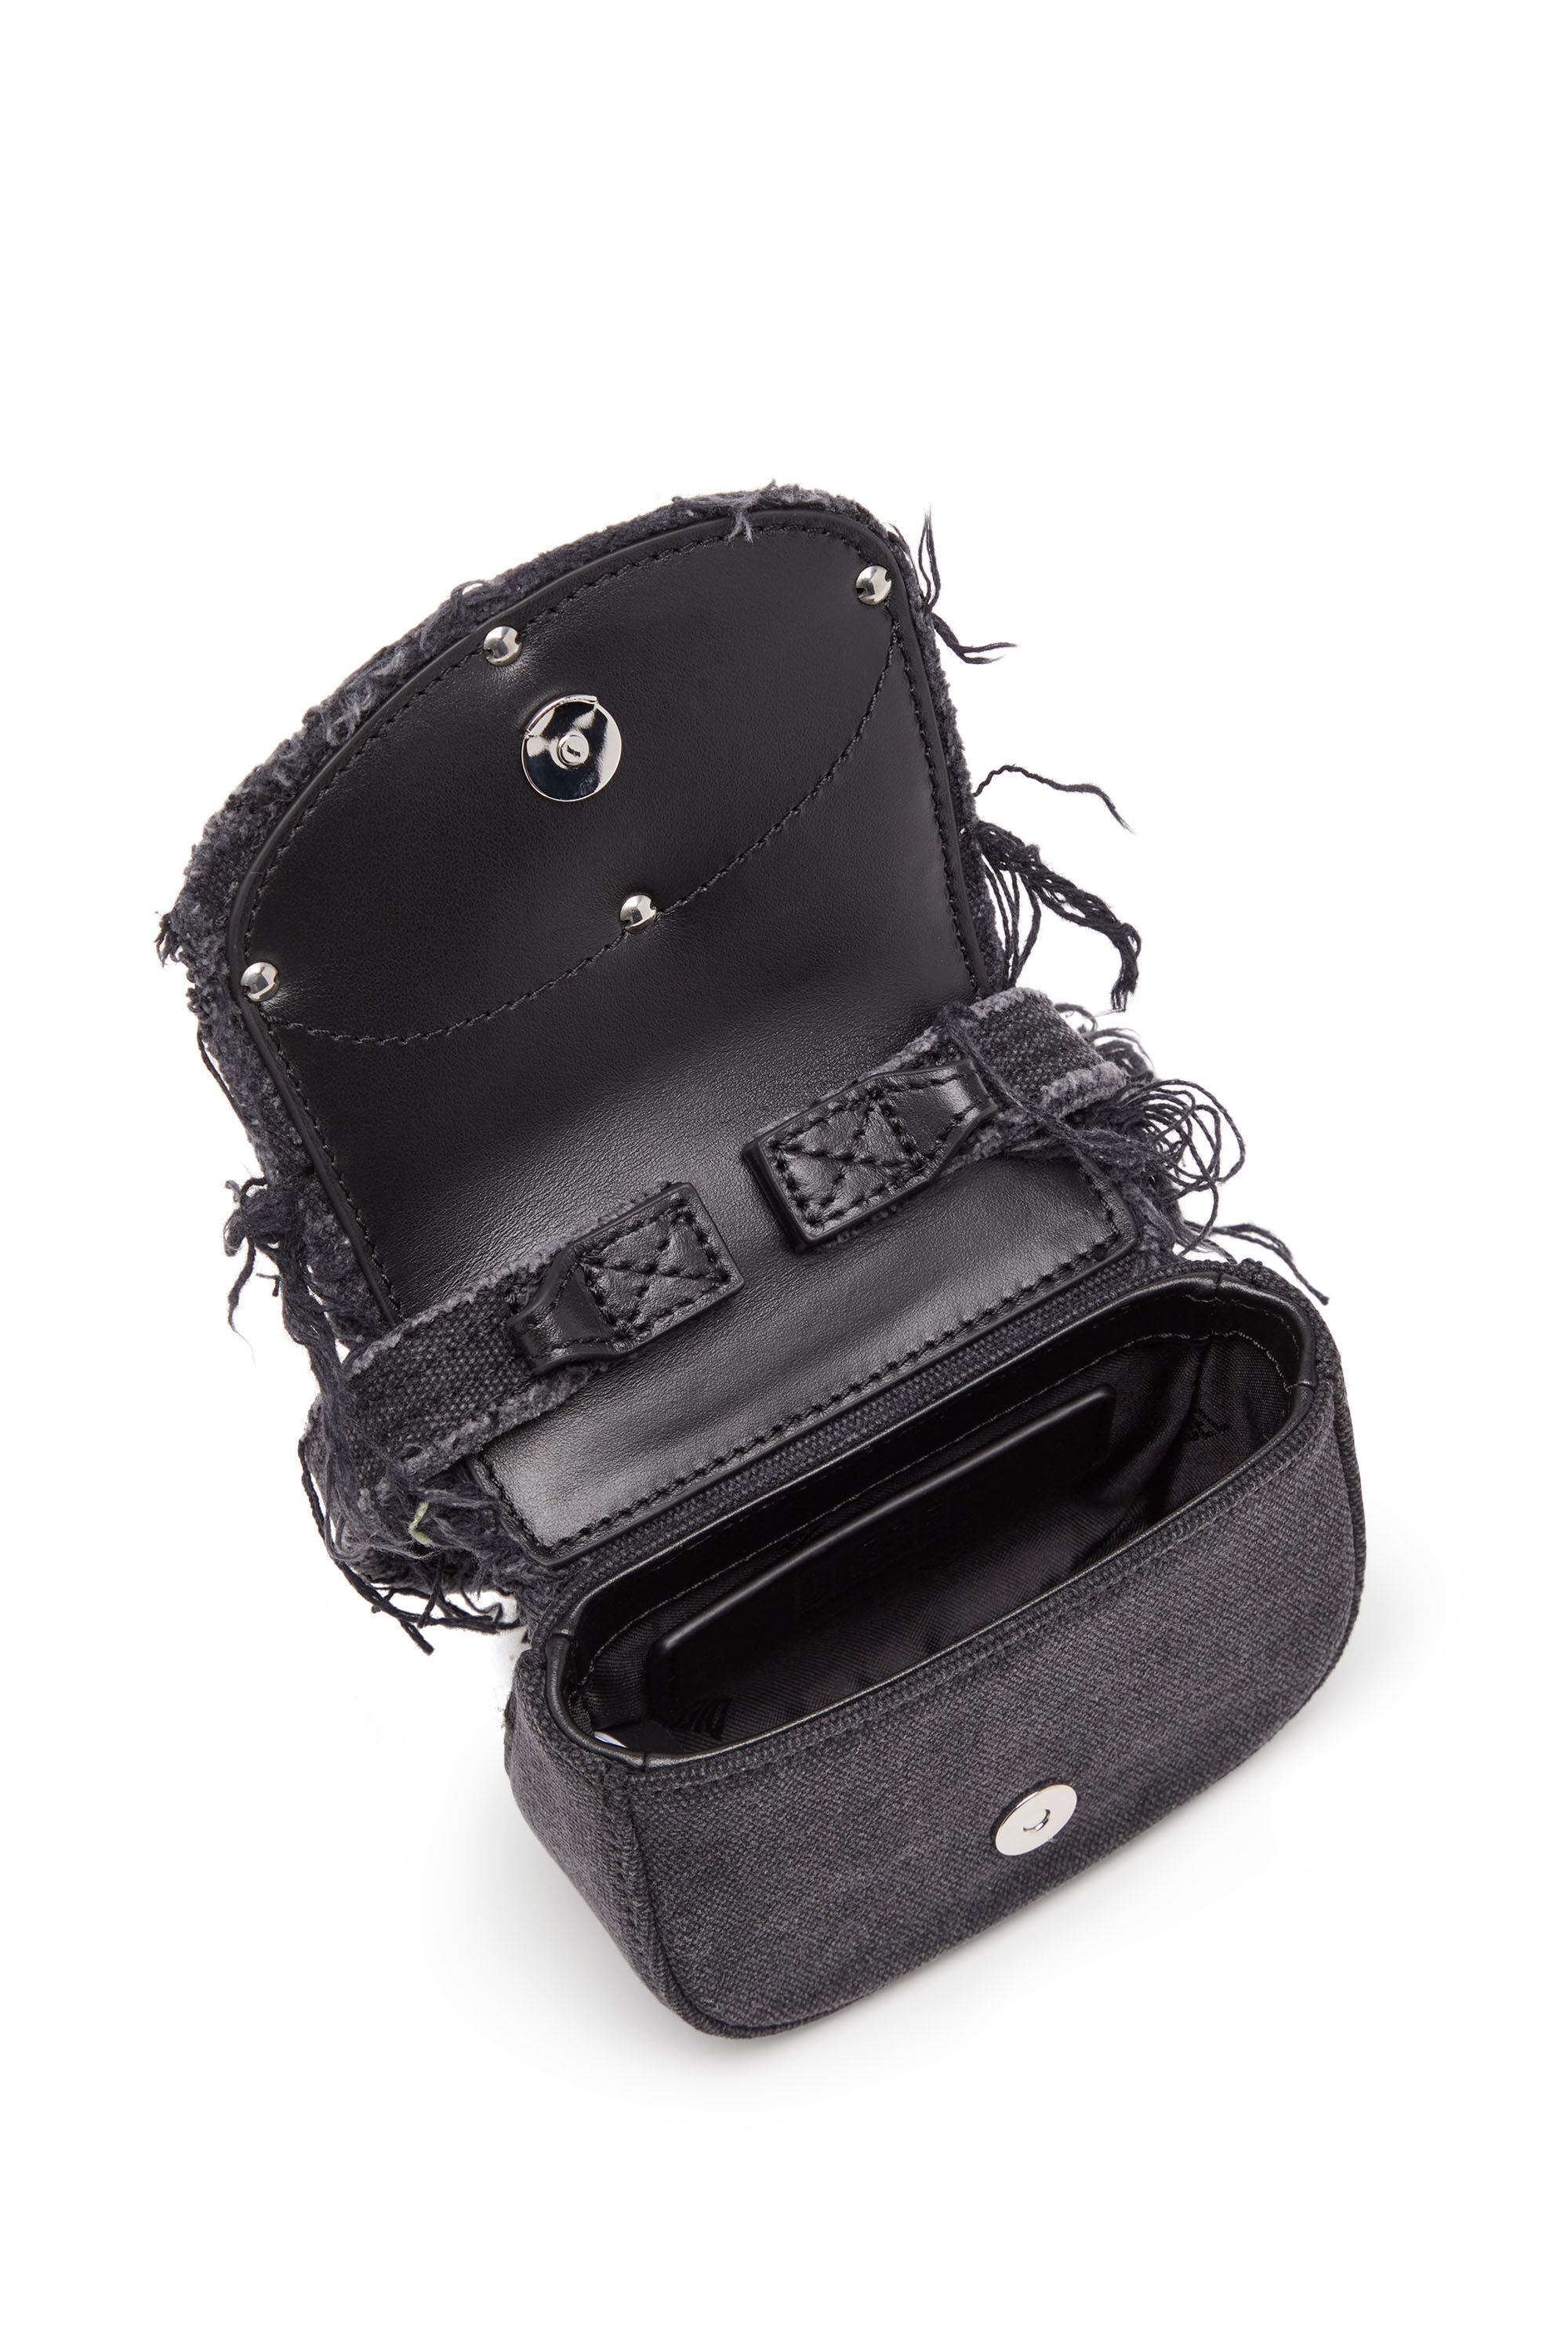 Diesel - 1DR XS, Woman 1DR XS-Iconic mini bag in canvas and leather in Black - Image 2